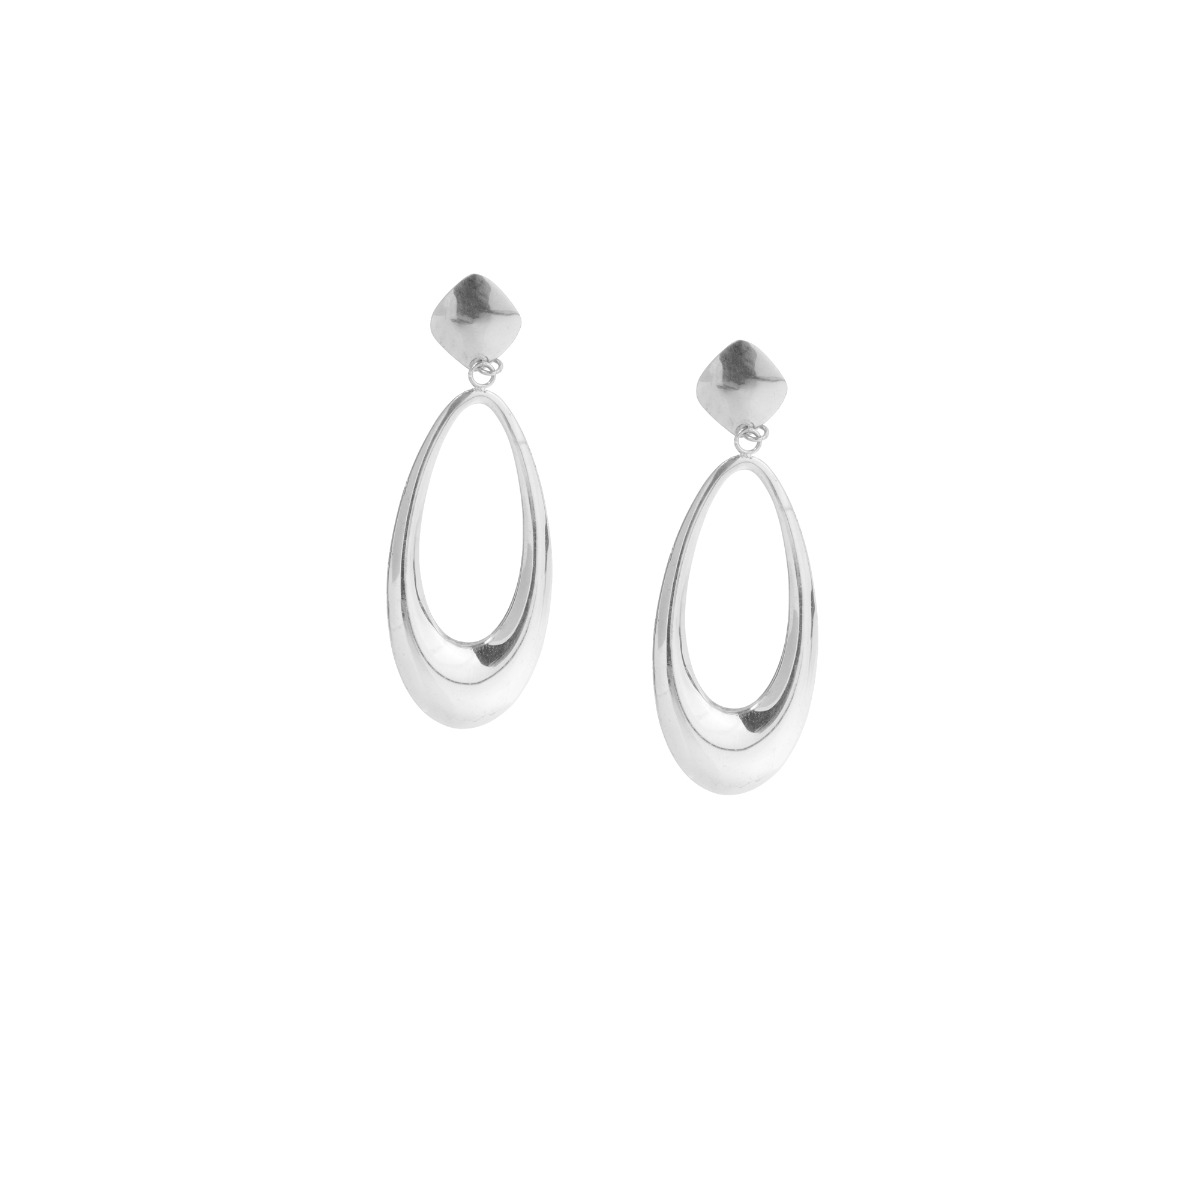 Oval Earrings in High-Polished Silver